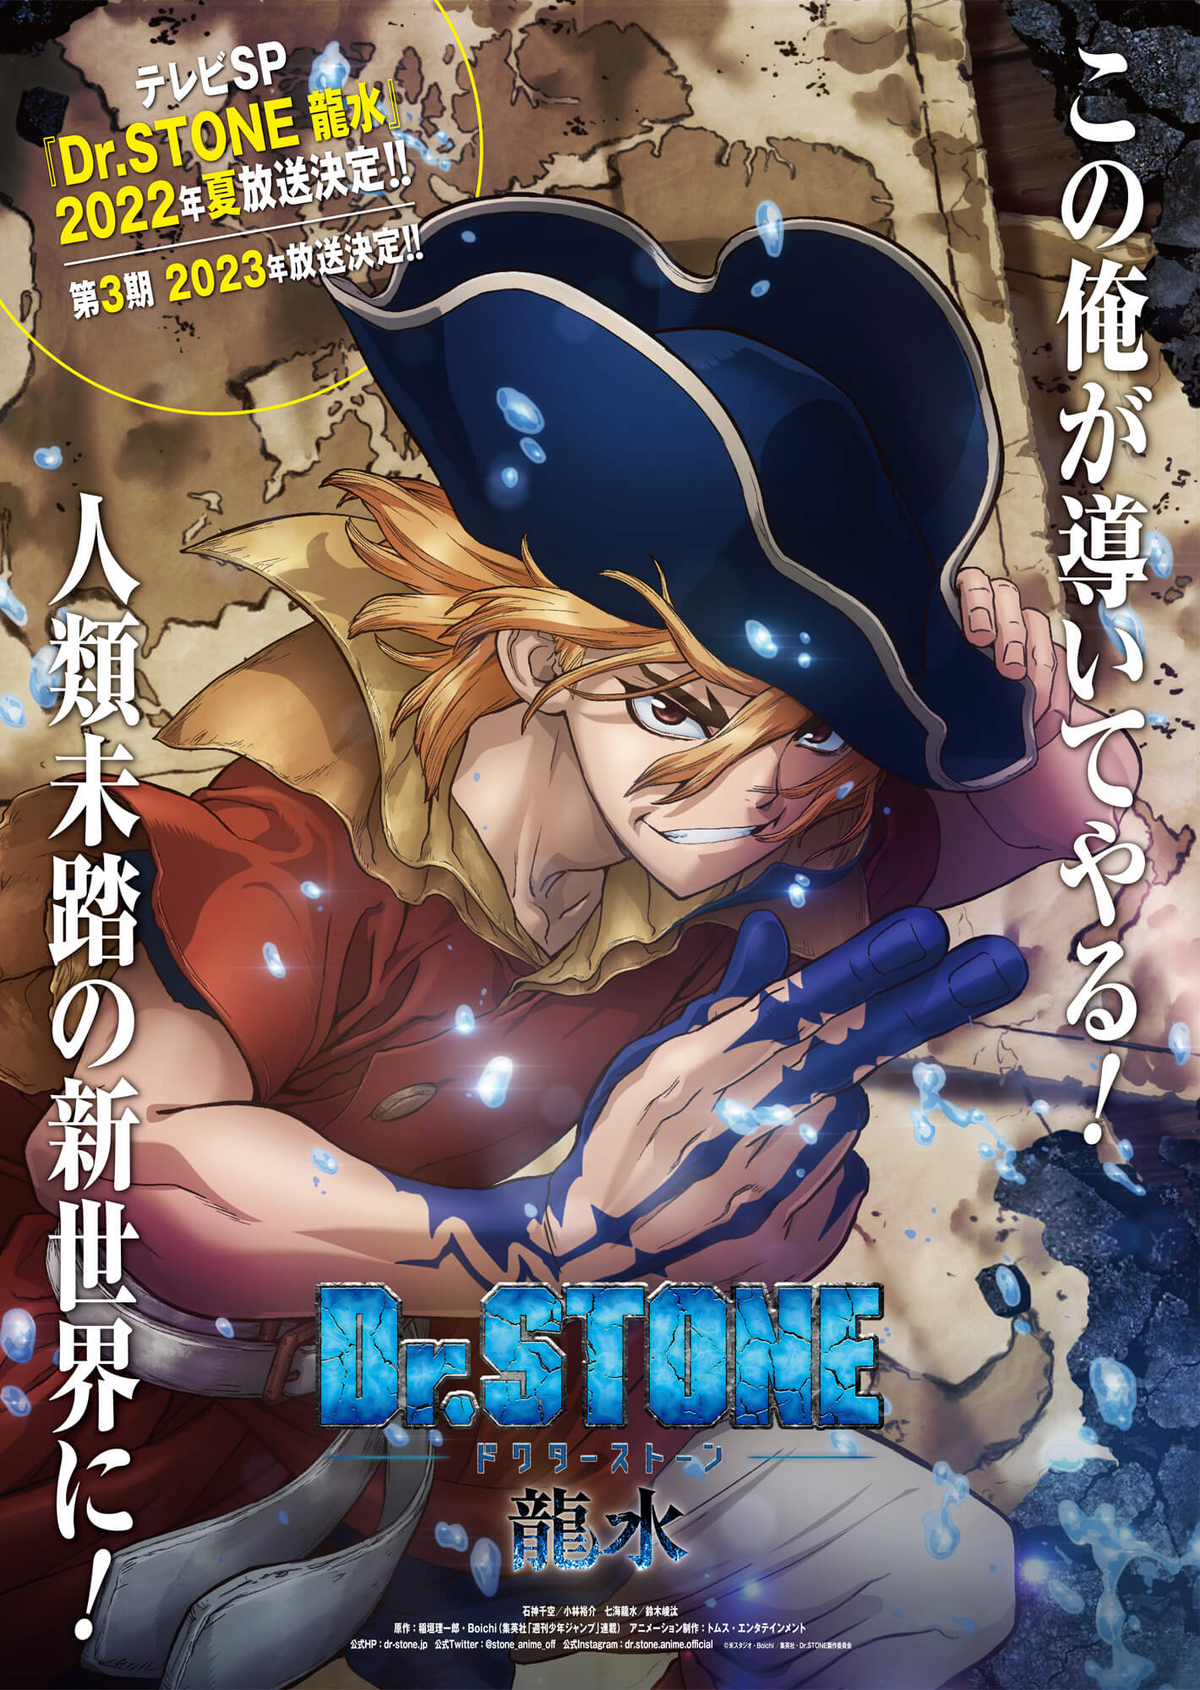 Dr. Stone: New World 2nd Cour Unveils Main Key Visual